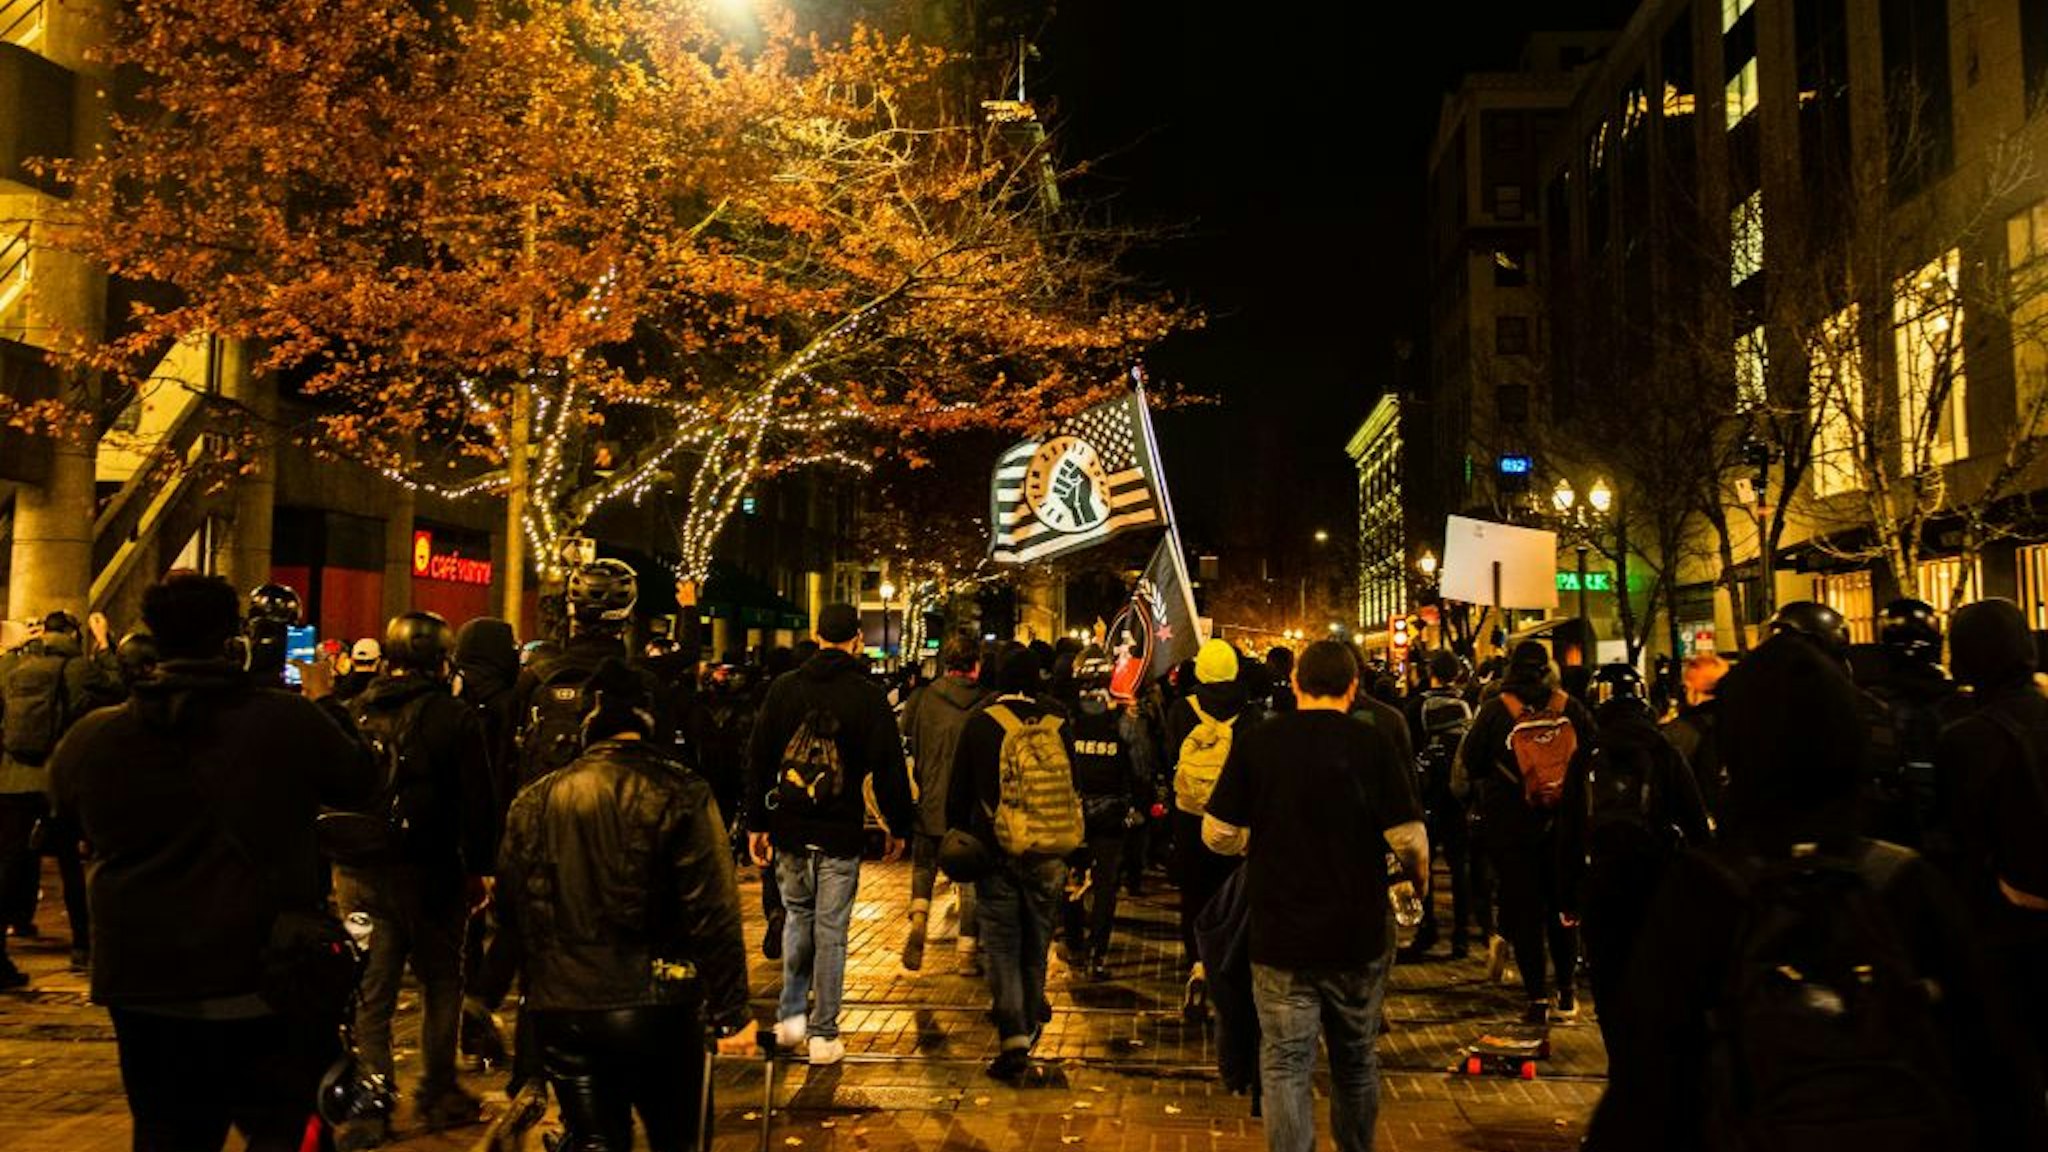 Portland city protestors march in Portland, Oregon on November 4, 2020, during a demonstration called by the "Black Lives Matter" movement, a day after the US Presidential Election. - Democratic